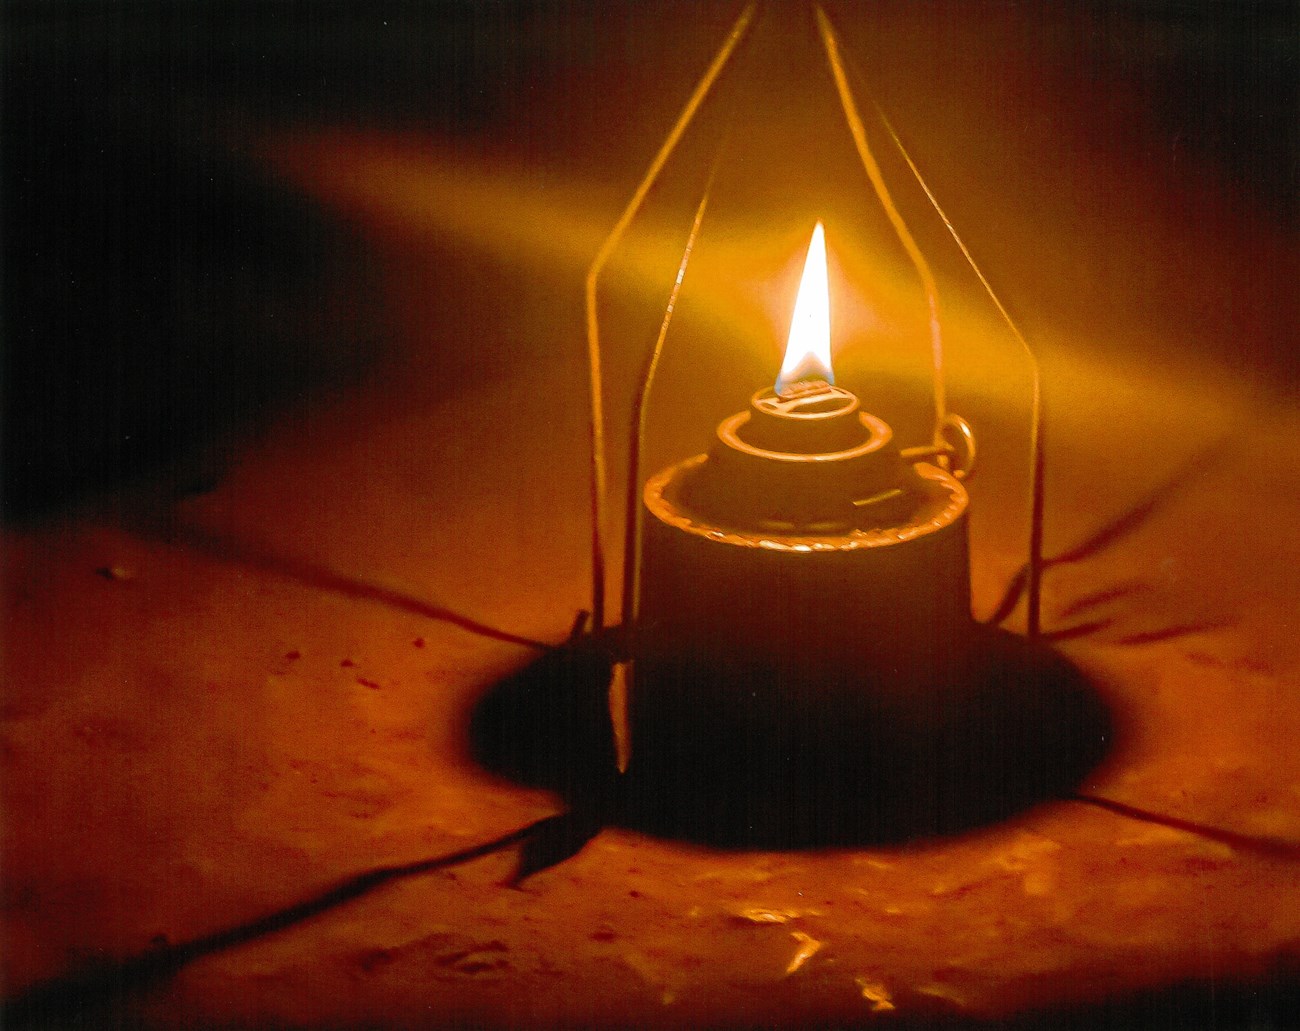 Close-up photo of a simple candle style lantern, the orange flame casts shadows and creates a halo.